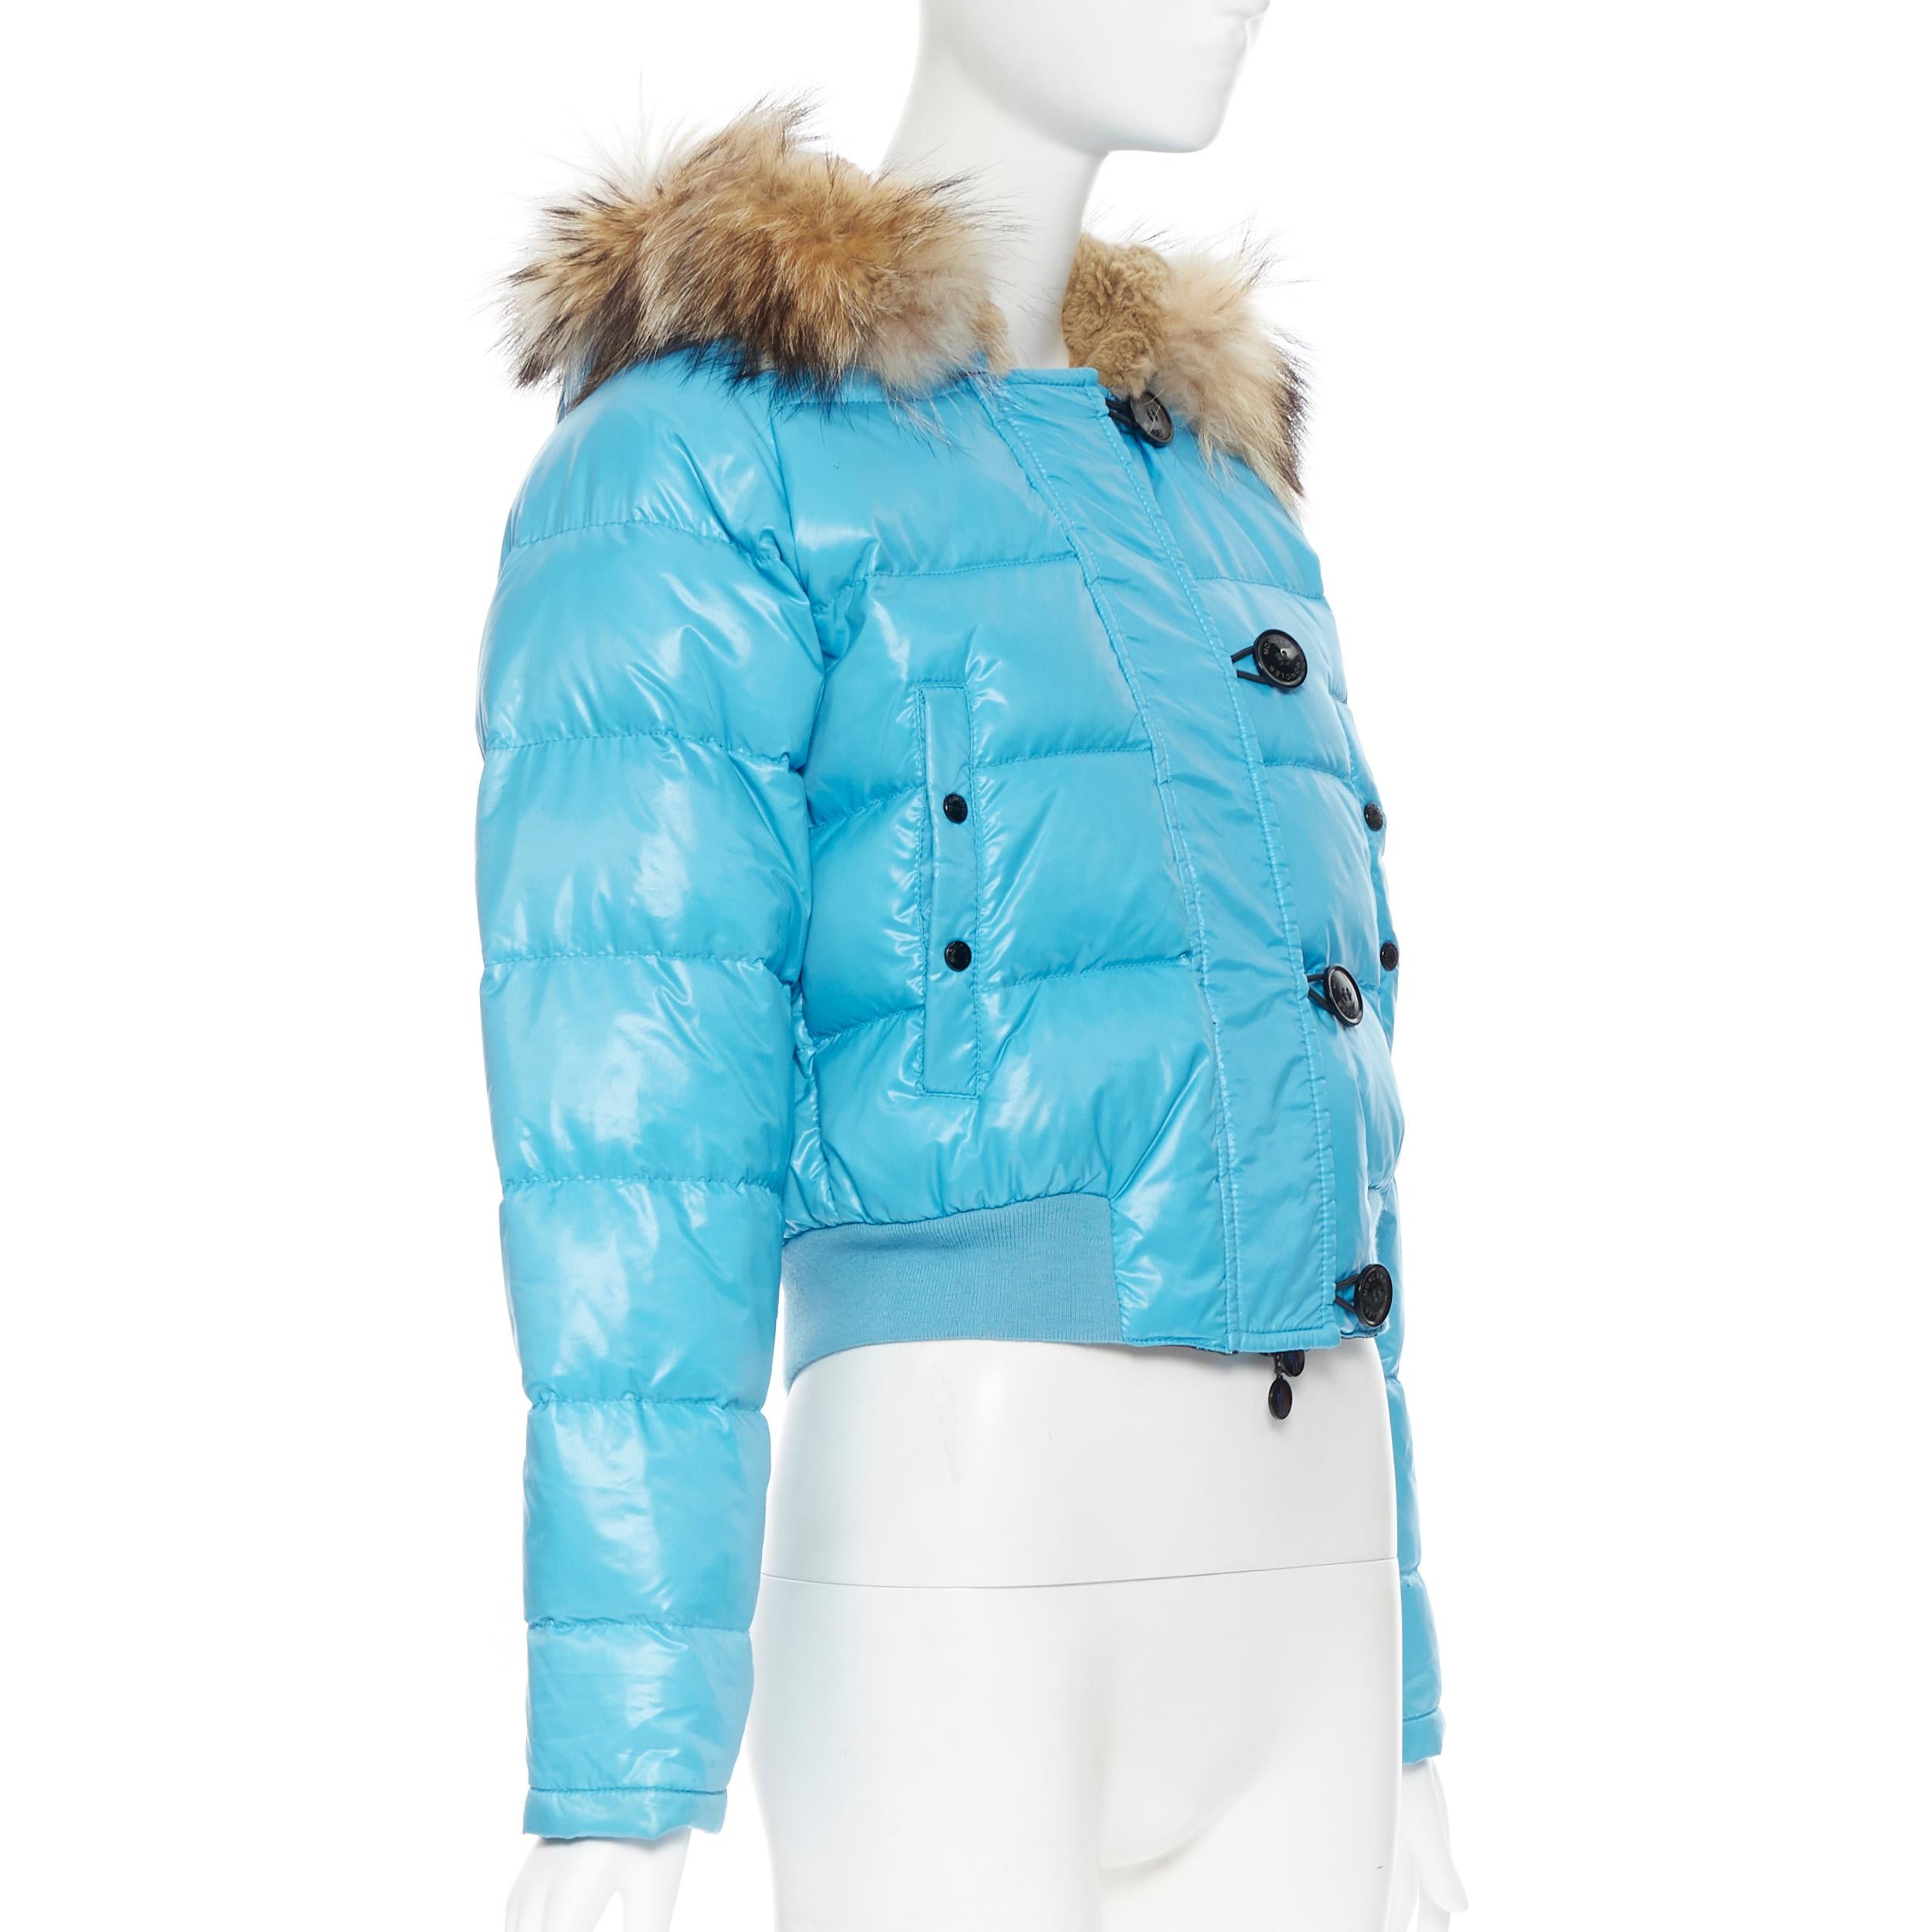 blue puffer jacket with fur